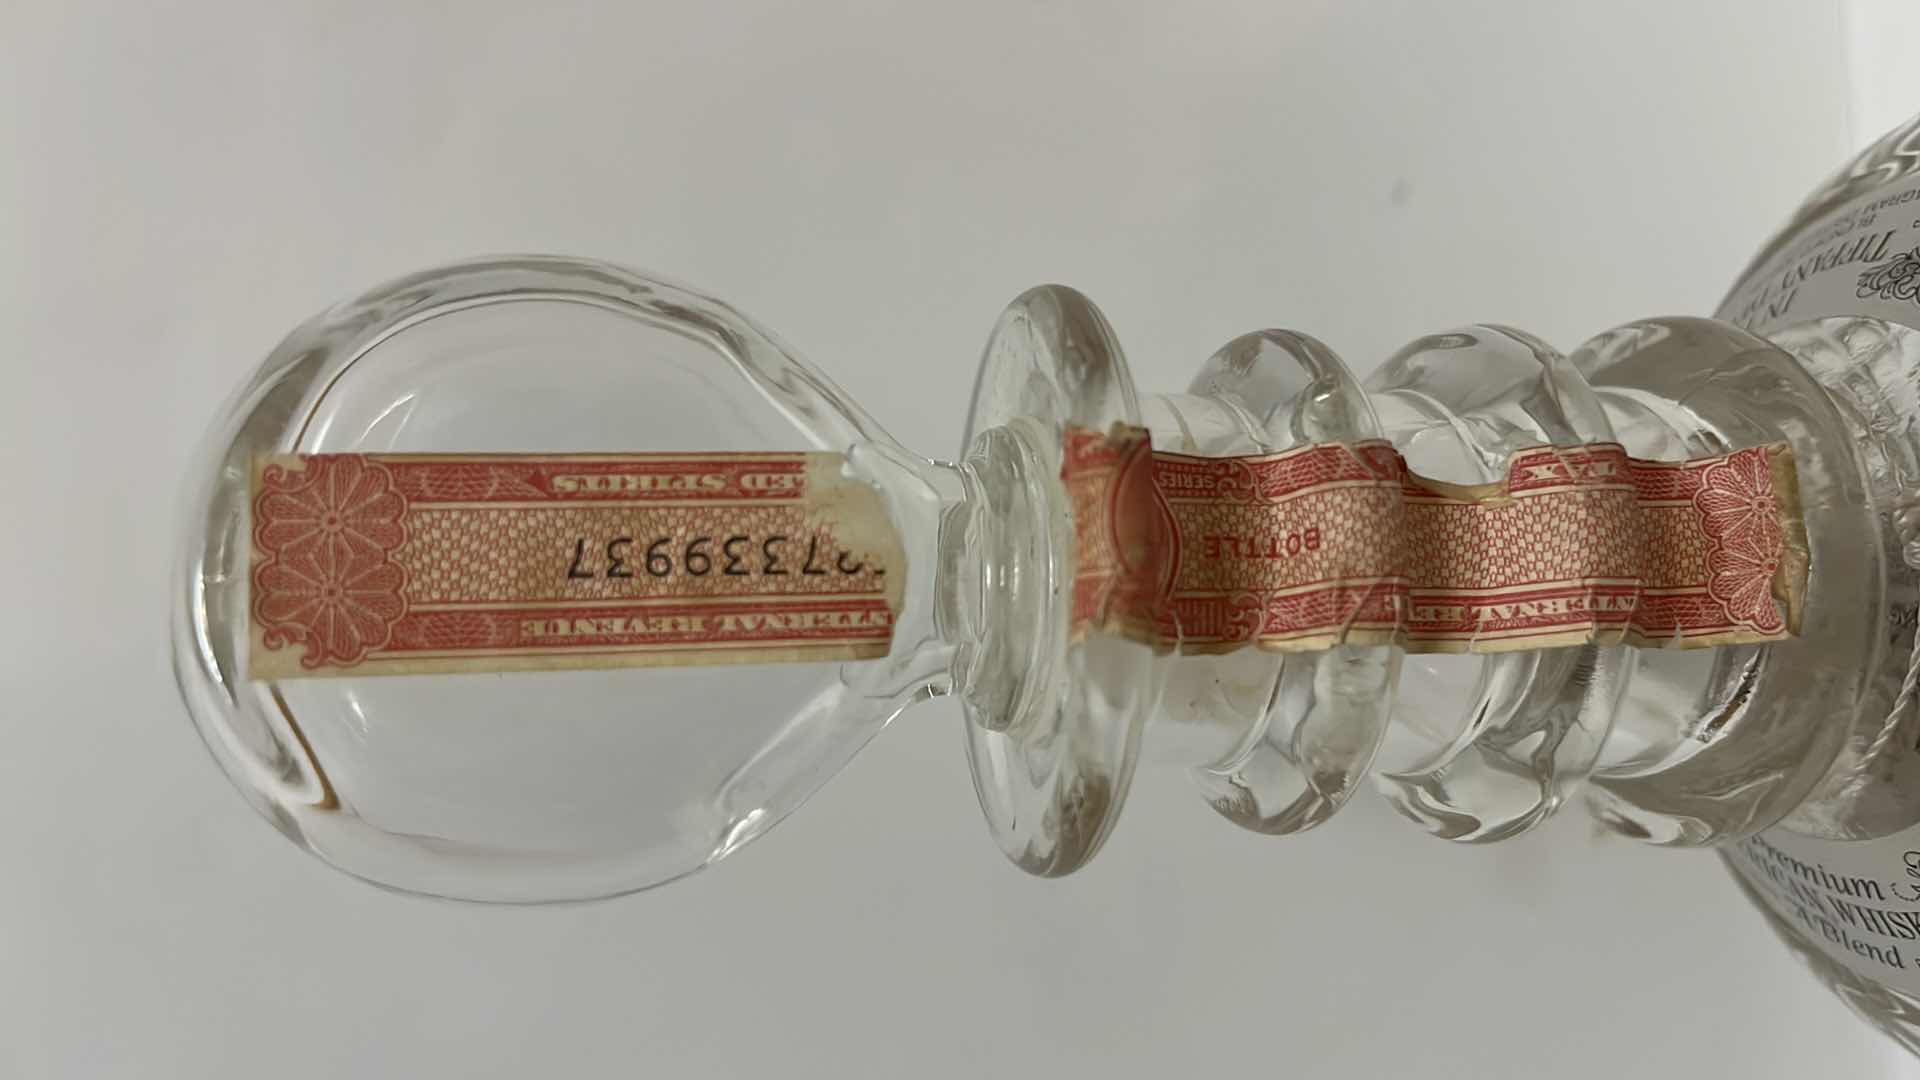 Photo 6 of TIFFANY & COMPANY SEAGRAM 1776 WHISKEY CLEAR GLASS DECANTER 4/5 QUART